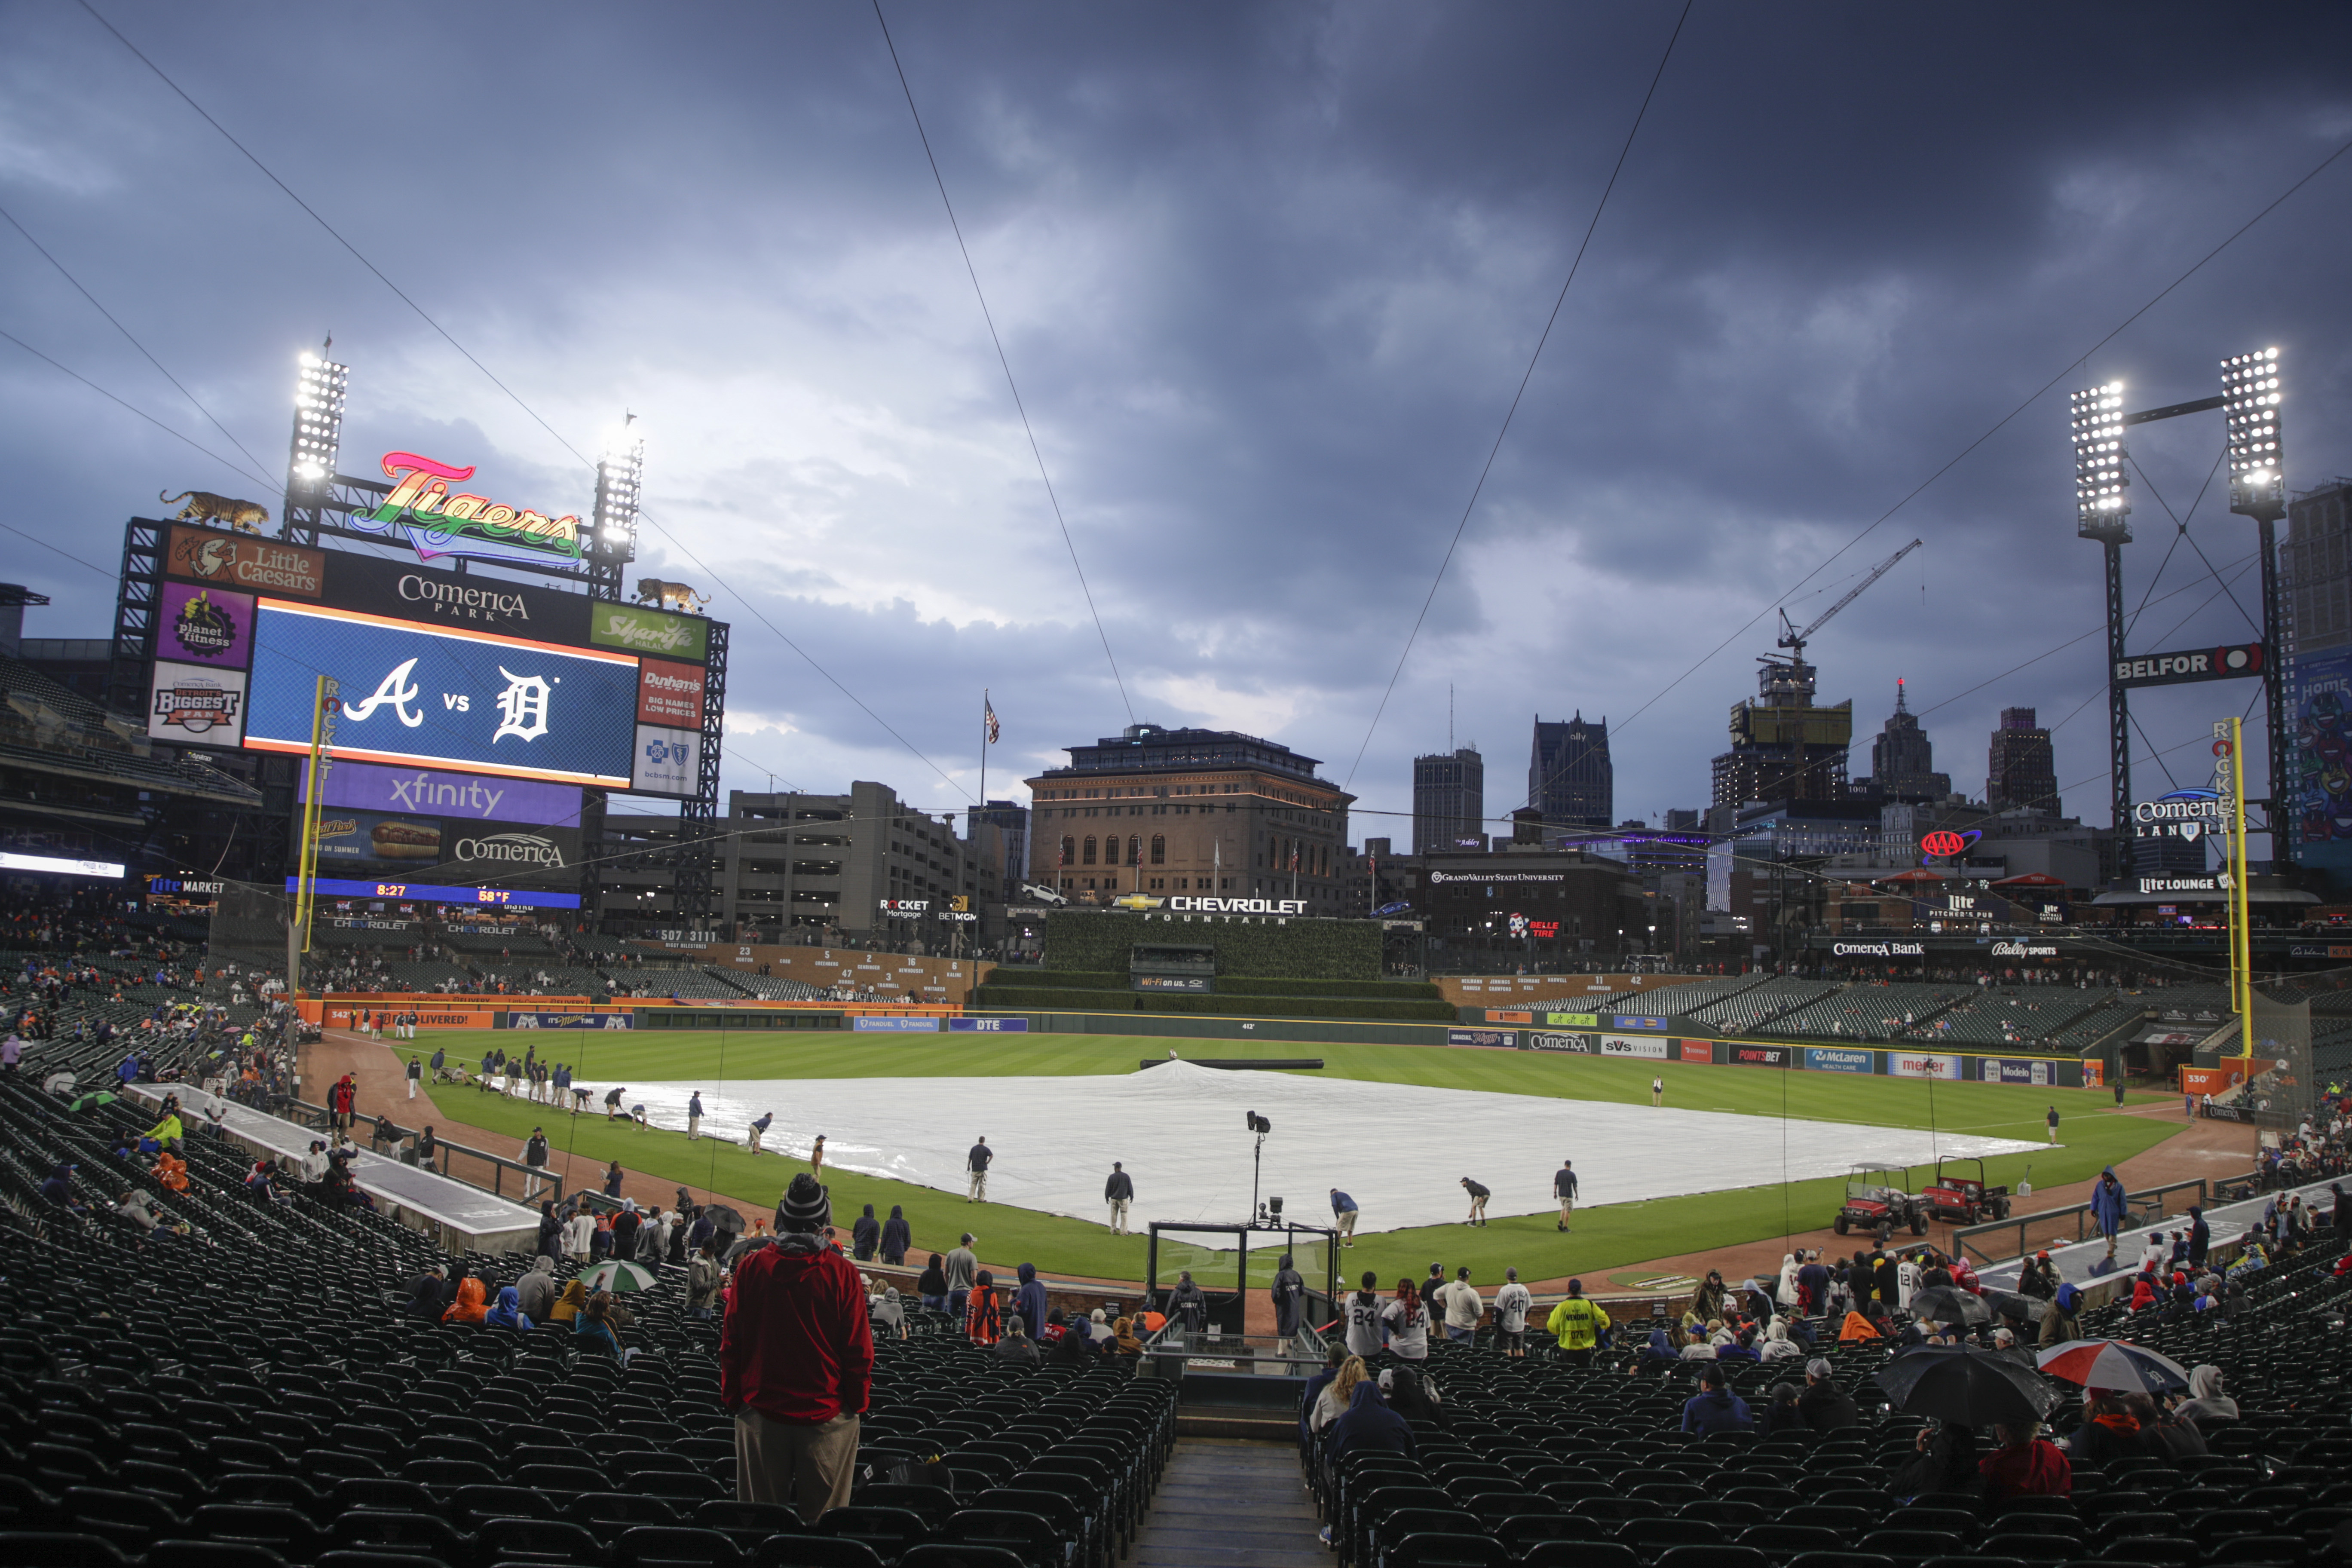 Where Do The Detroit Tigers Play?